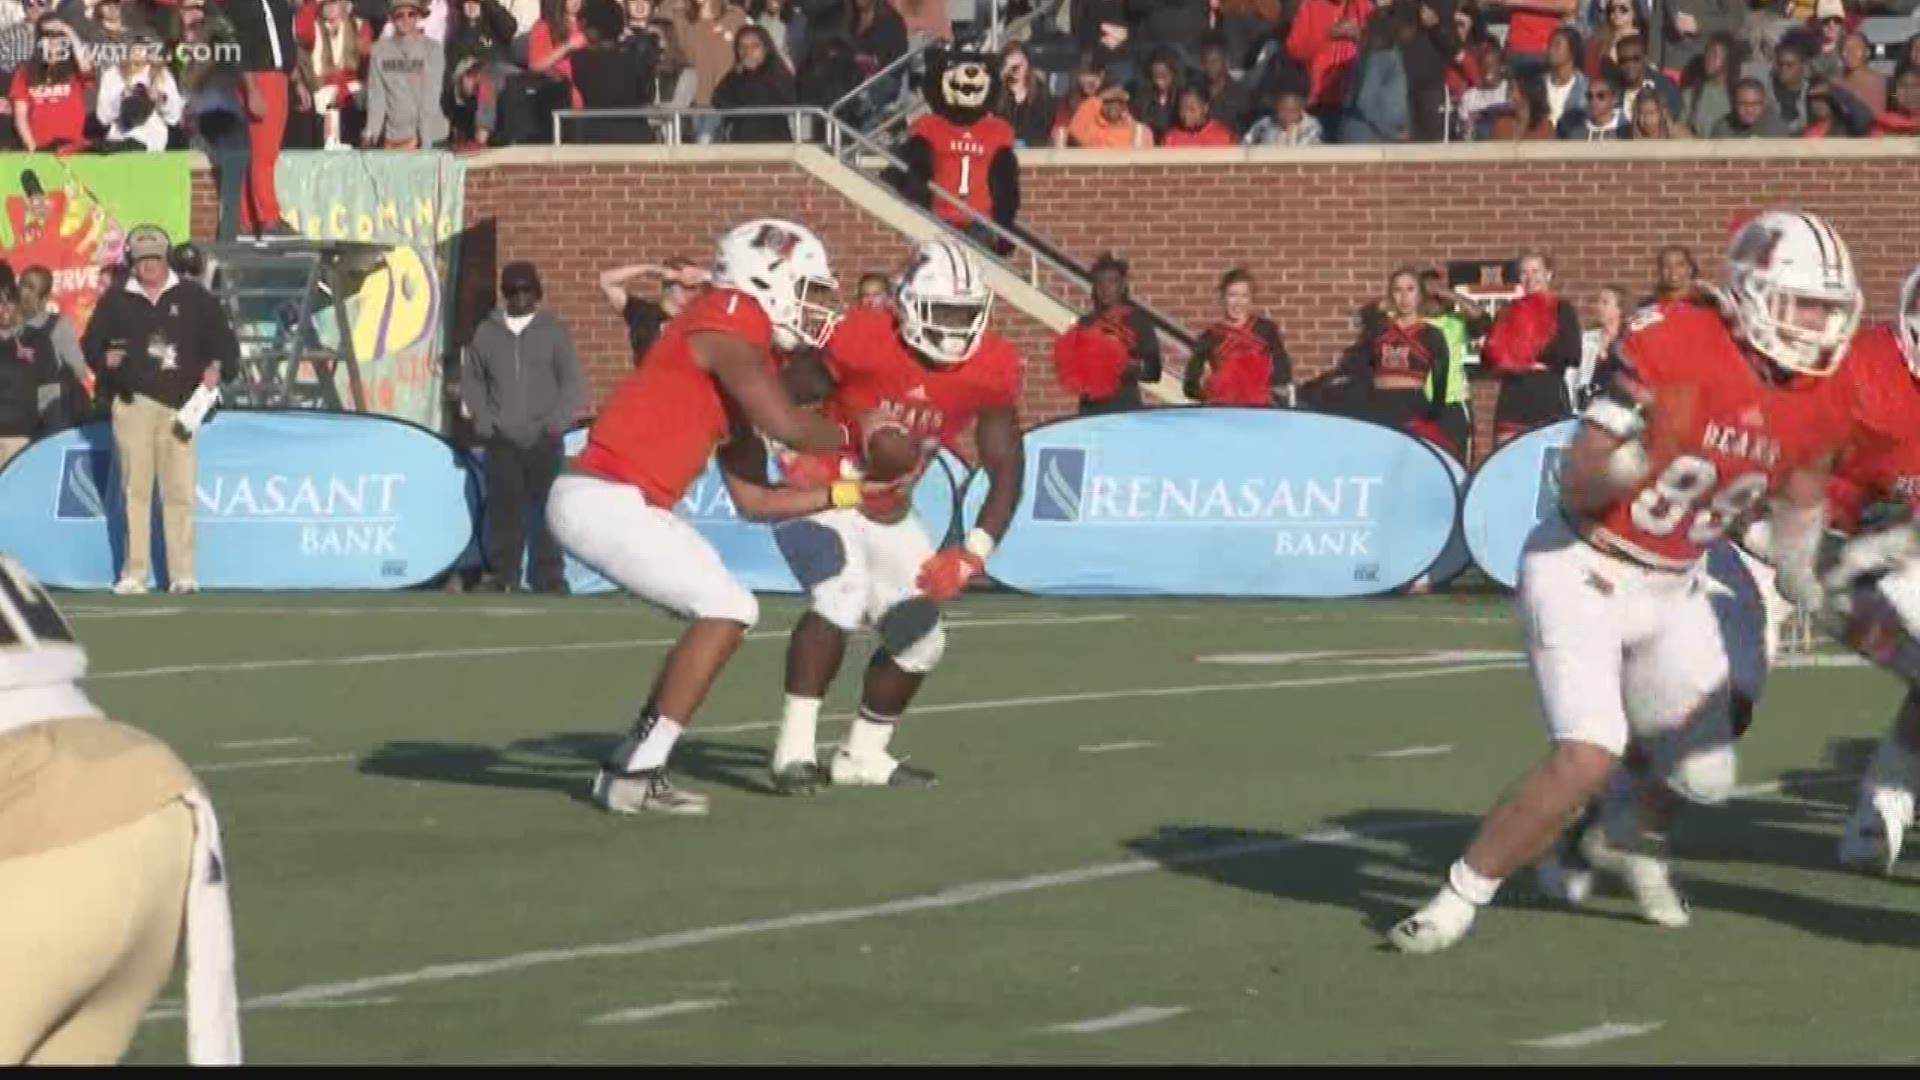 The Mercer Bears lose to Wofford in their homecoming game 41-7 on Saturday.